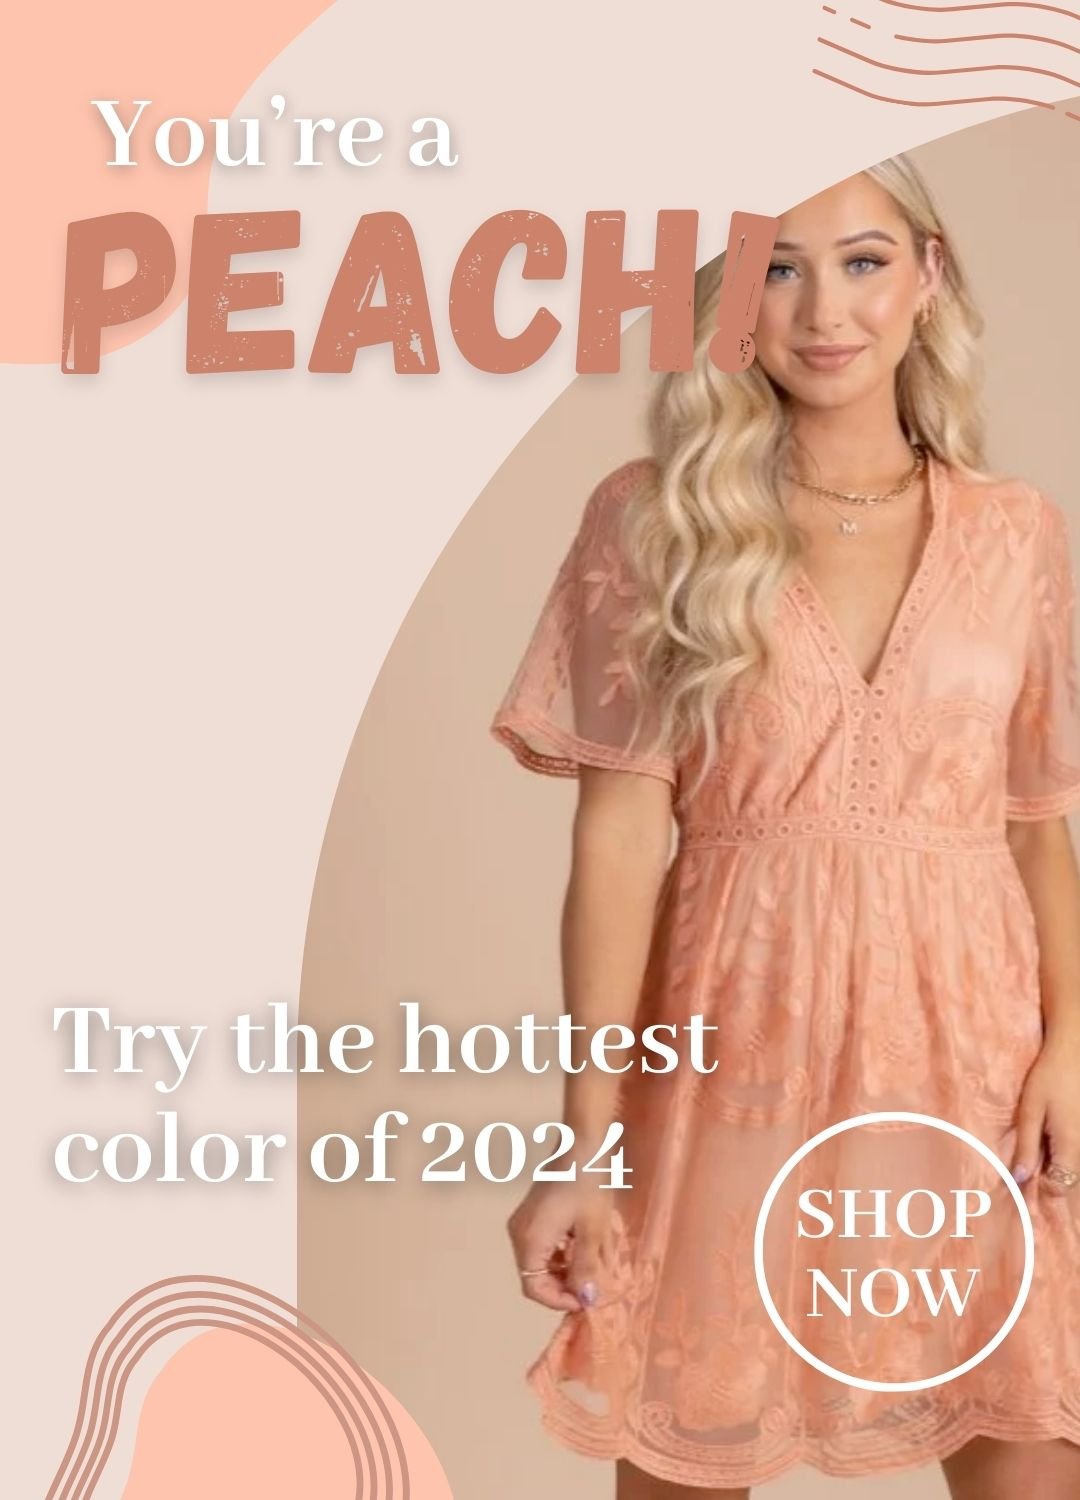 There is a woman in a peach lace dress. There are variations of peach accents on the page and there is text that says you are a peach, try the hottest color of twenty twenty four. There is a white shop now circle button.